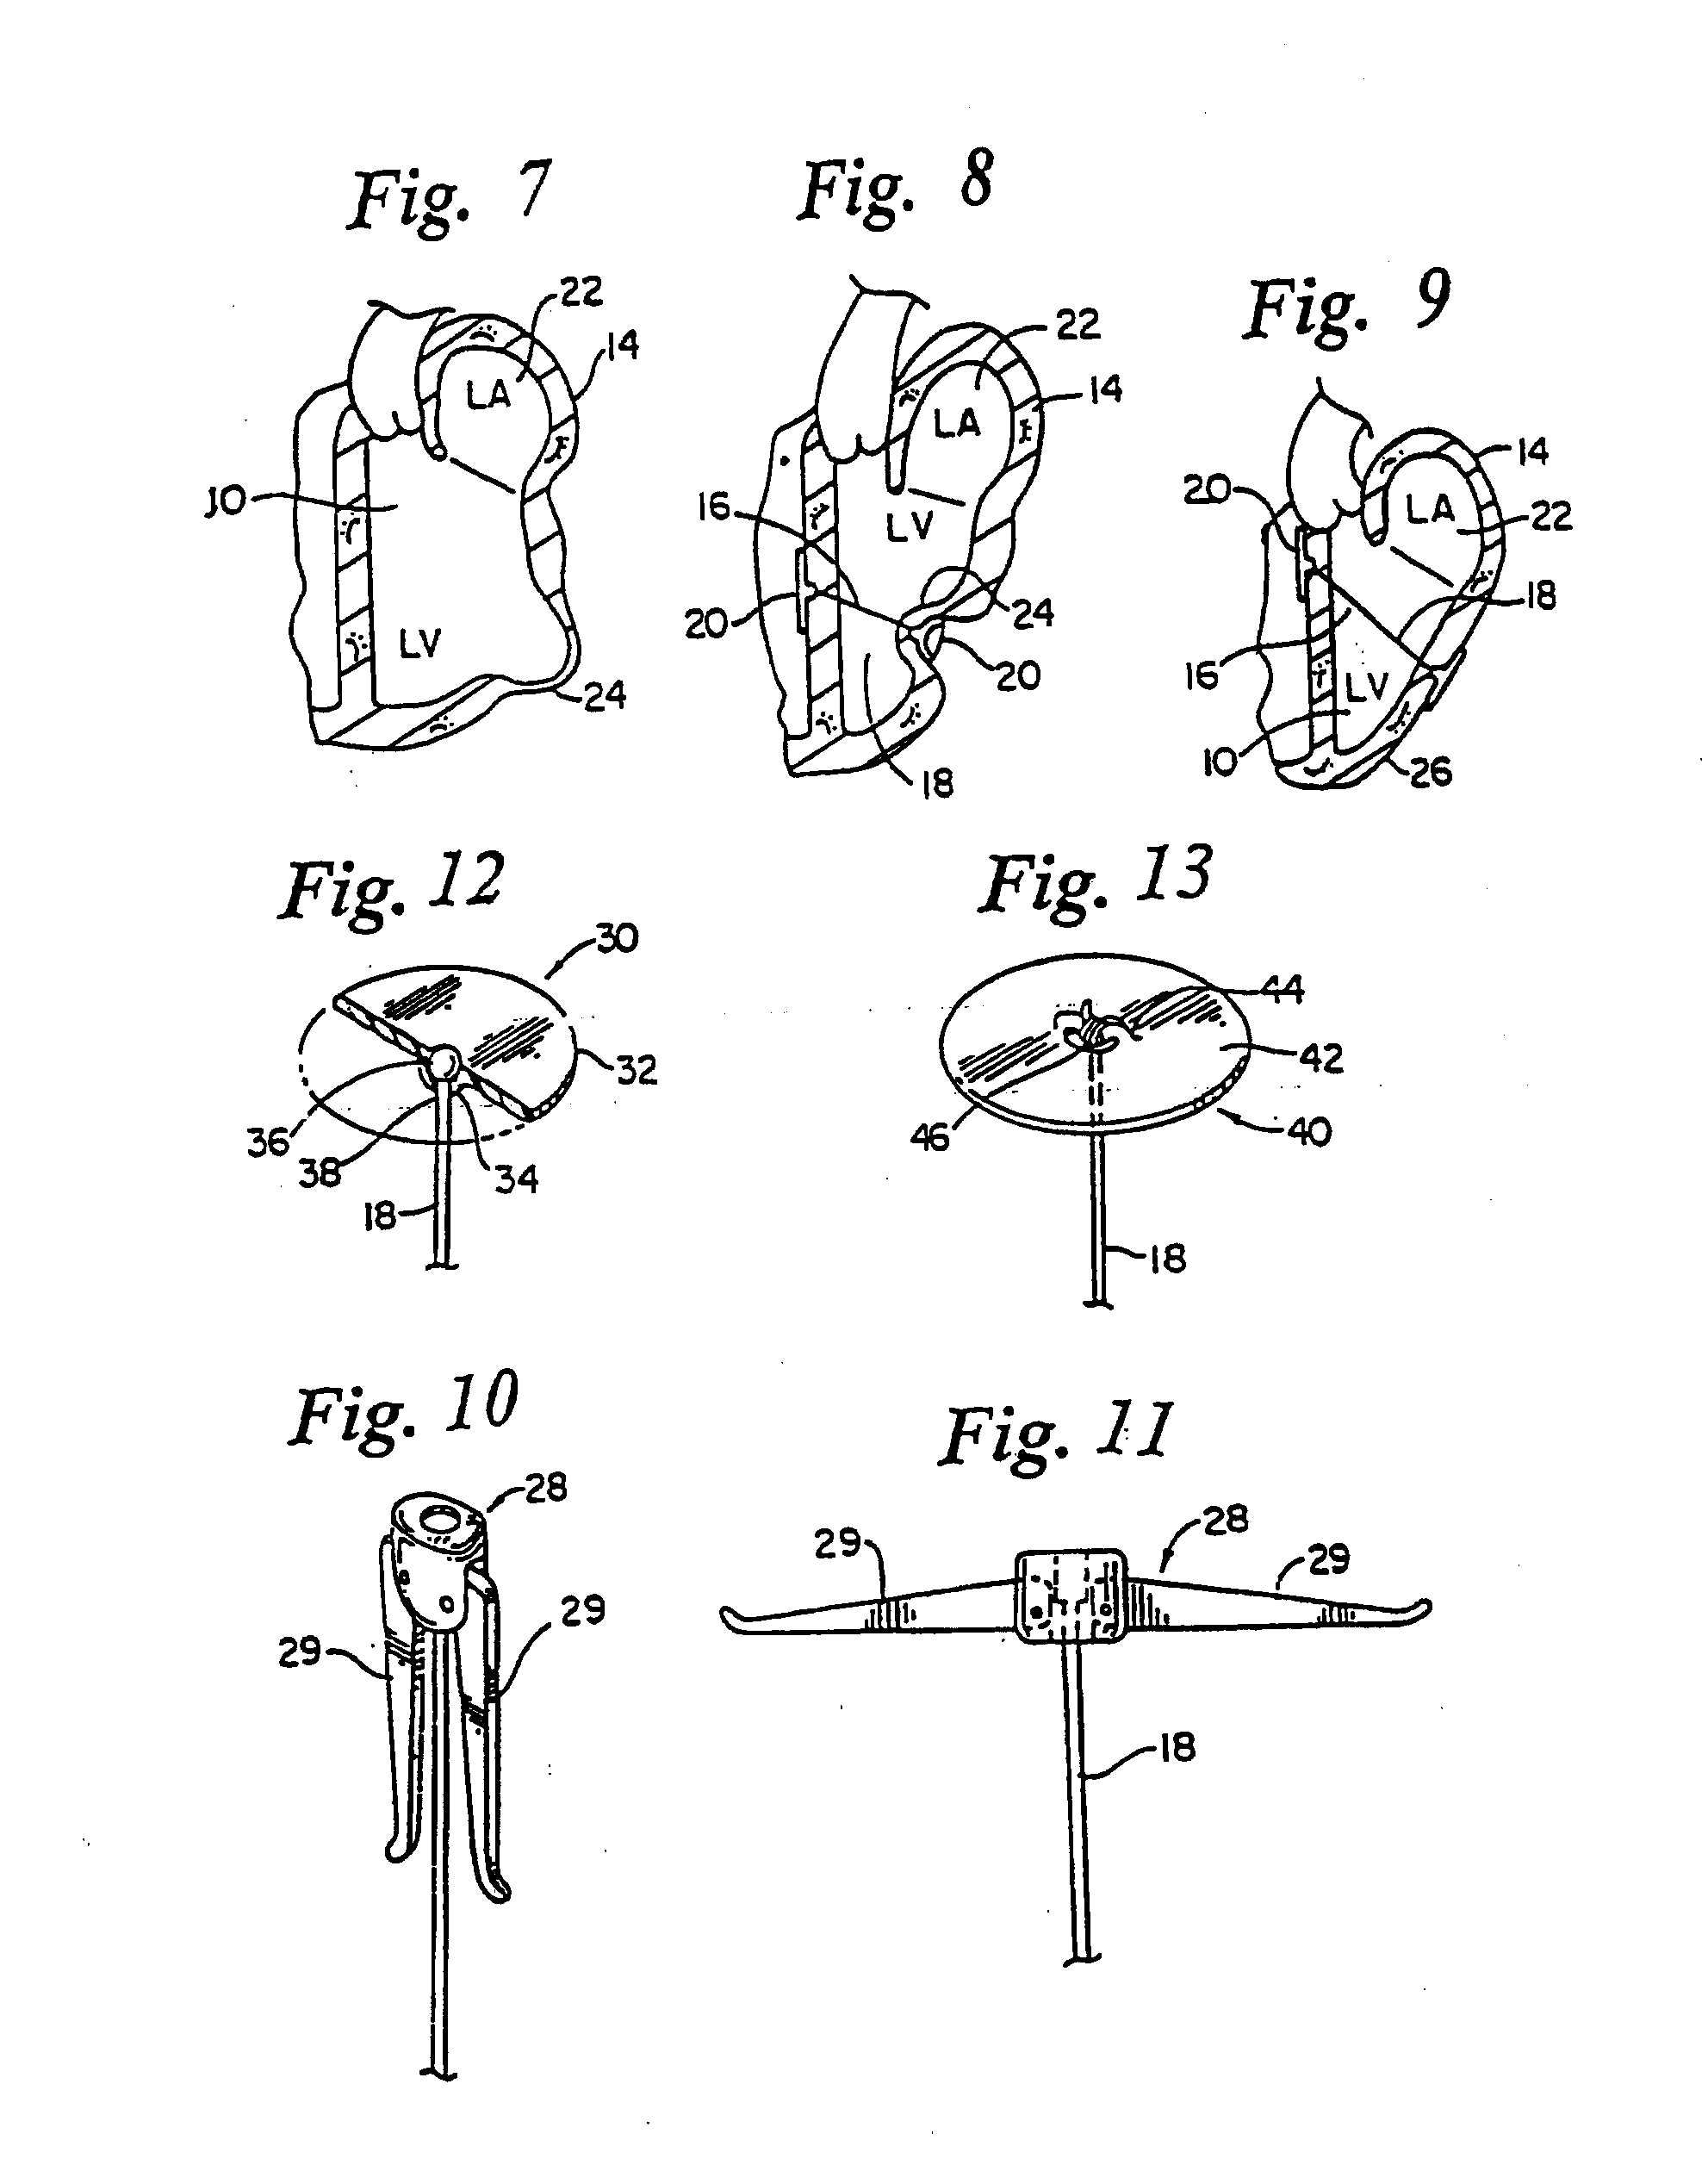 Heart wall tension reduction apparatus